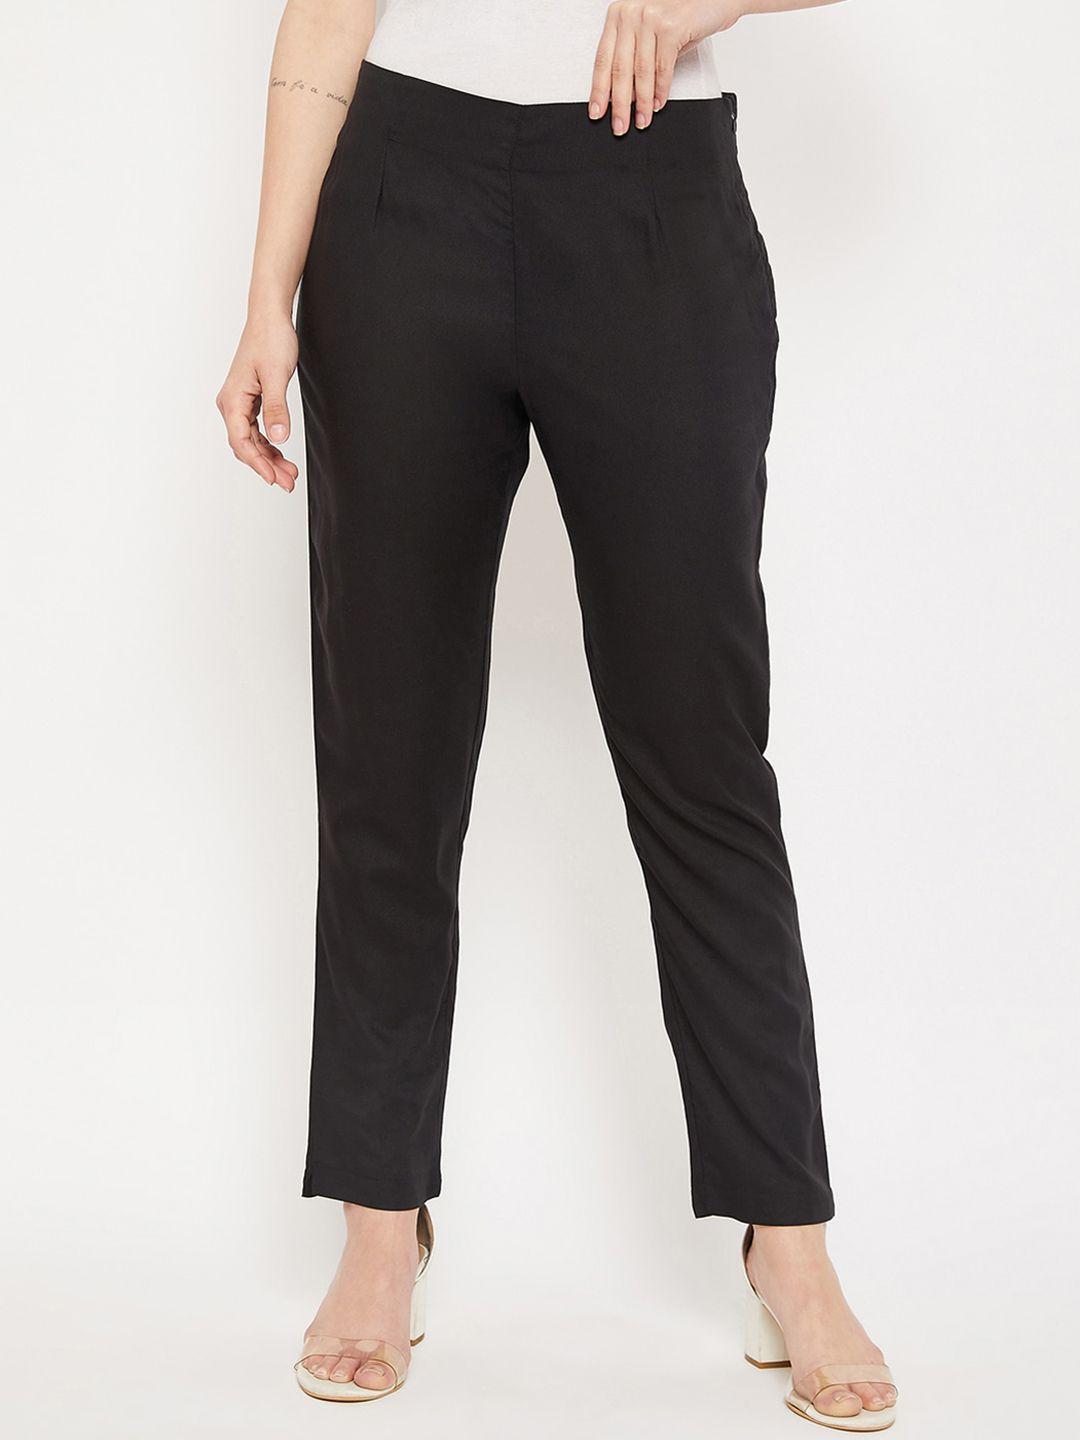 cantabil-women-regular-fit-easy-wash-cotton-trousers